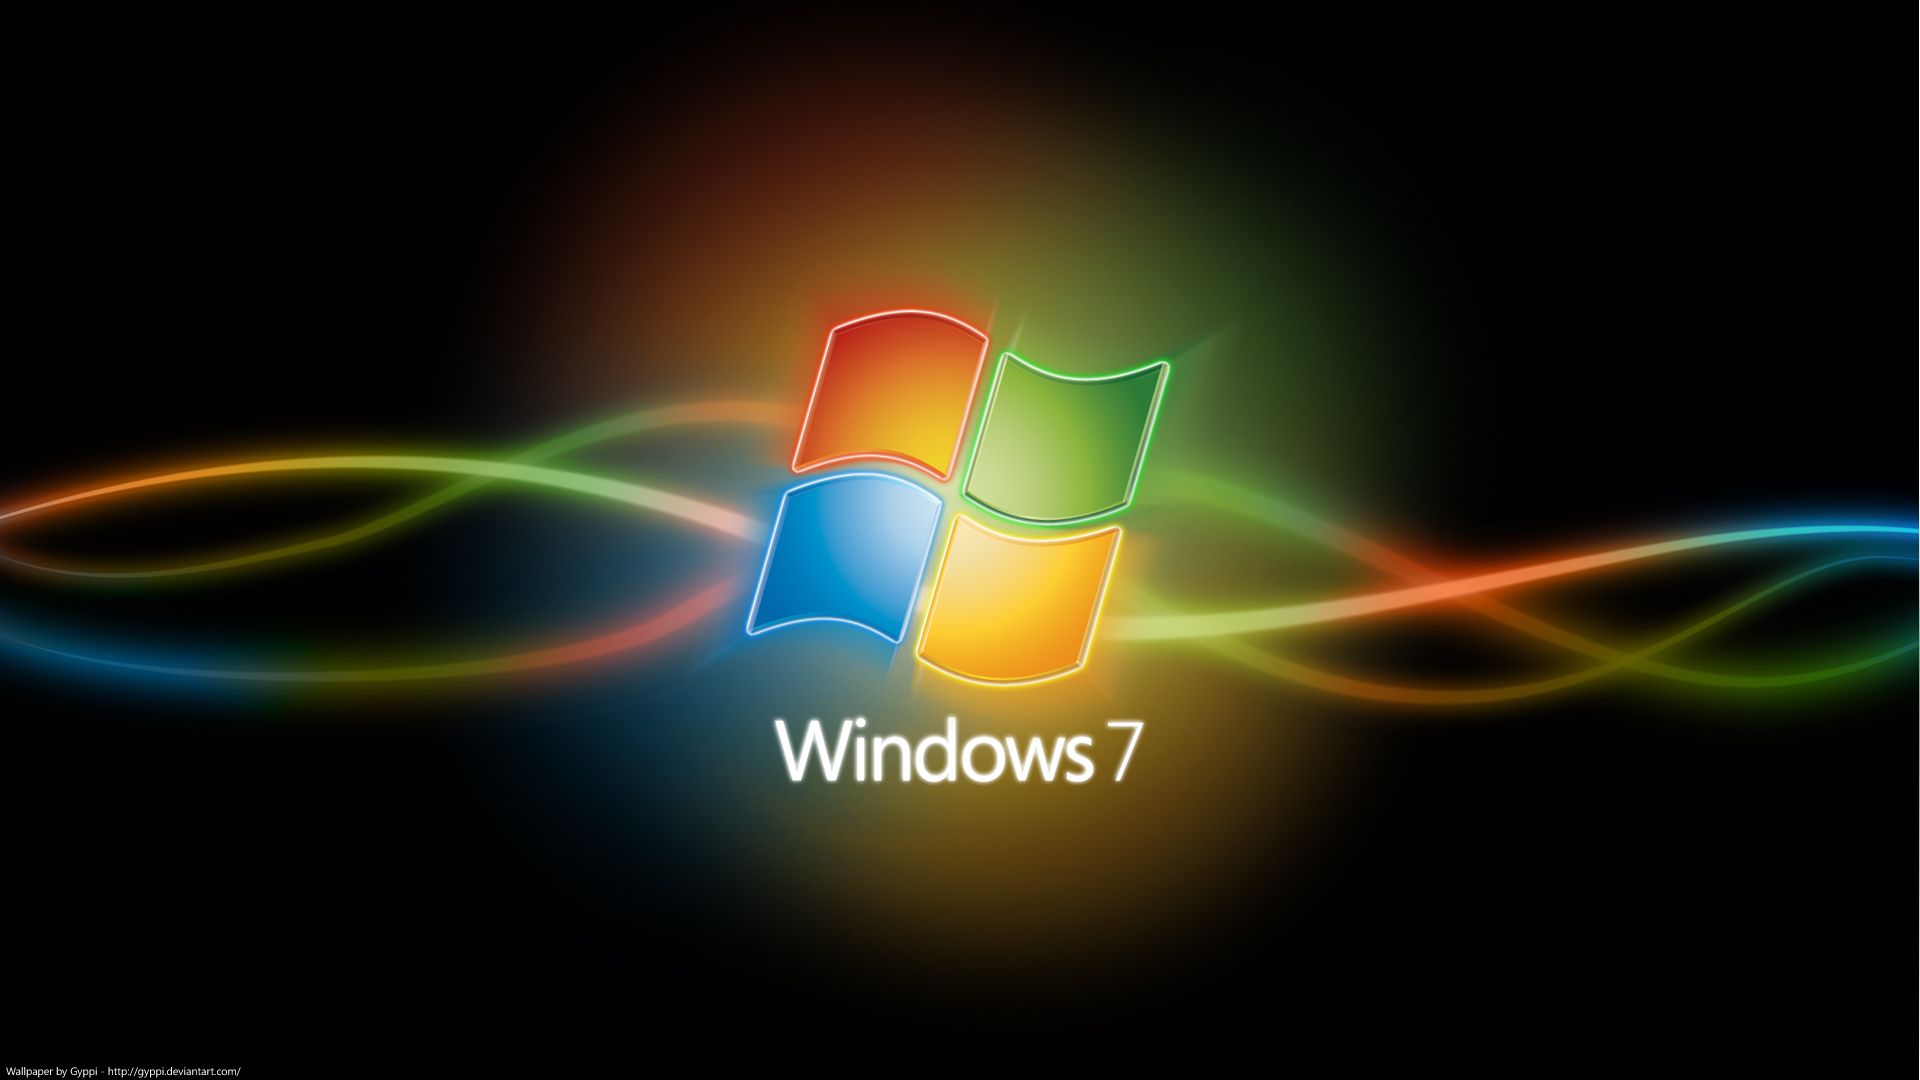 37 High Definition Windows 7 Wallpapers / Backgrounds For Free Download